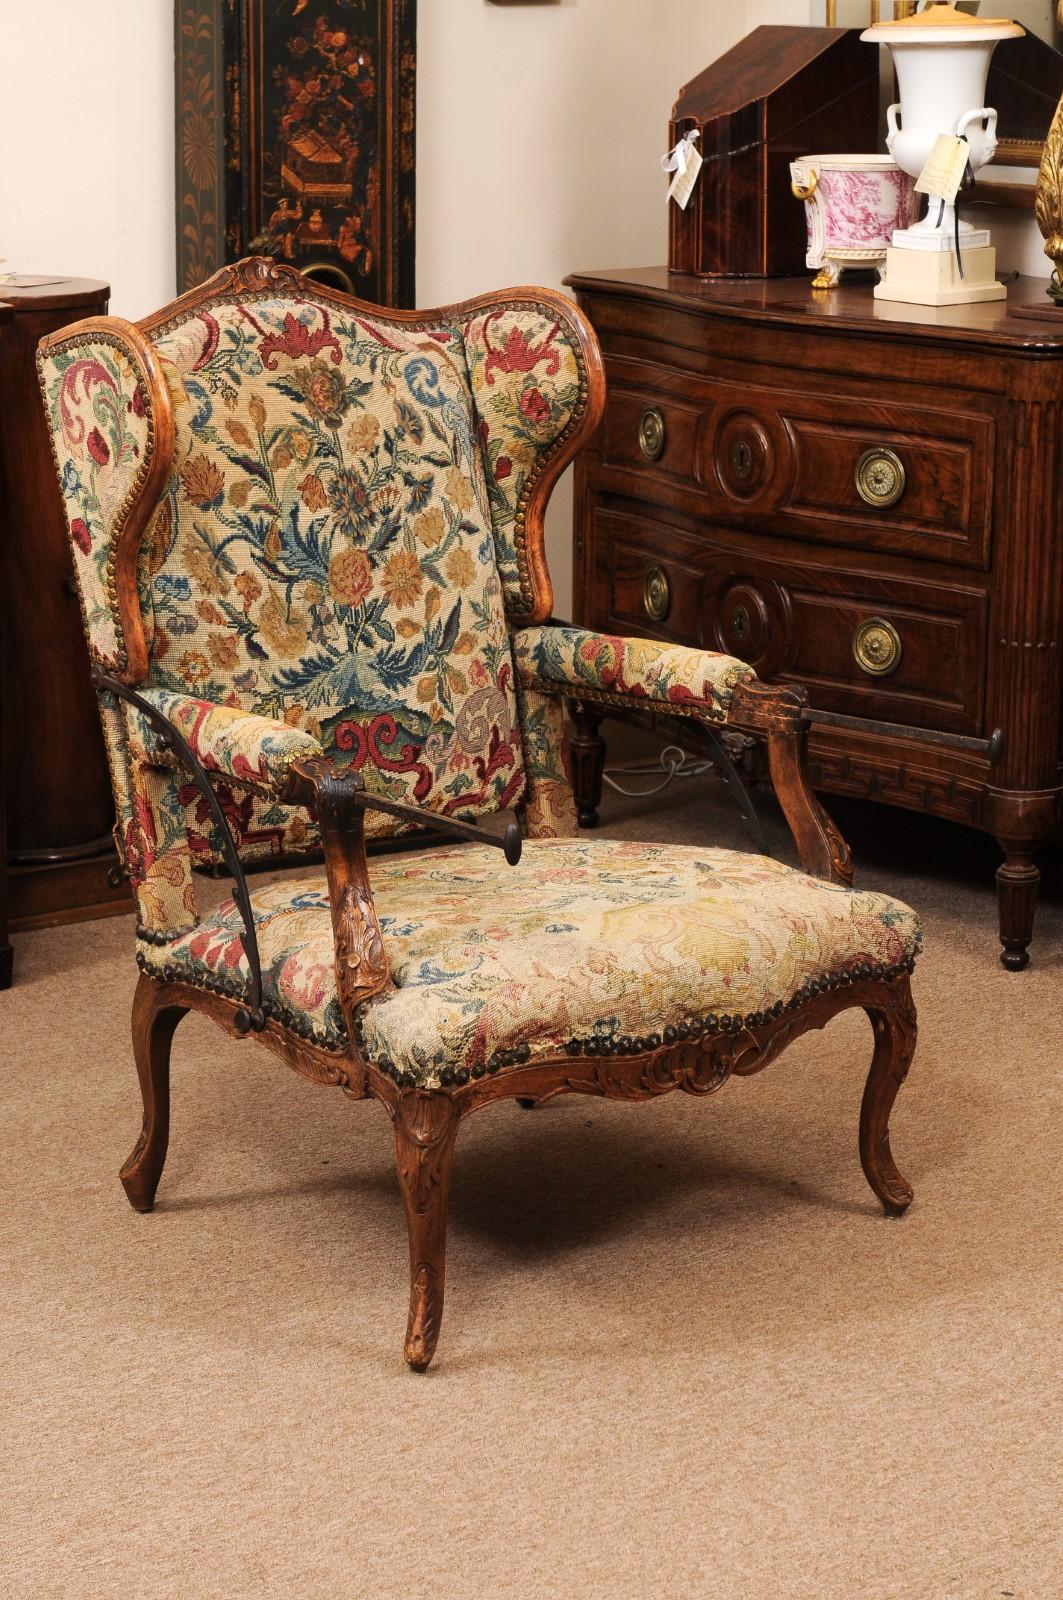 Early 18th Century French Regence Period Walnut Ratchet Wing Chair with Needlewo In Fair Condition For Sale In Atlanta, GA